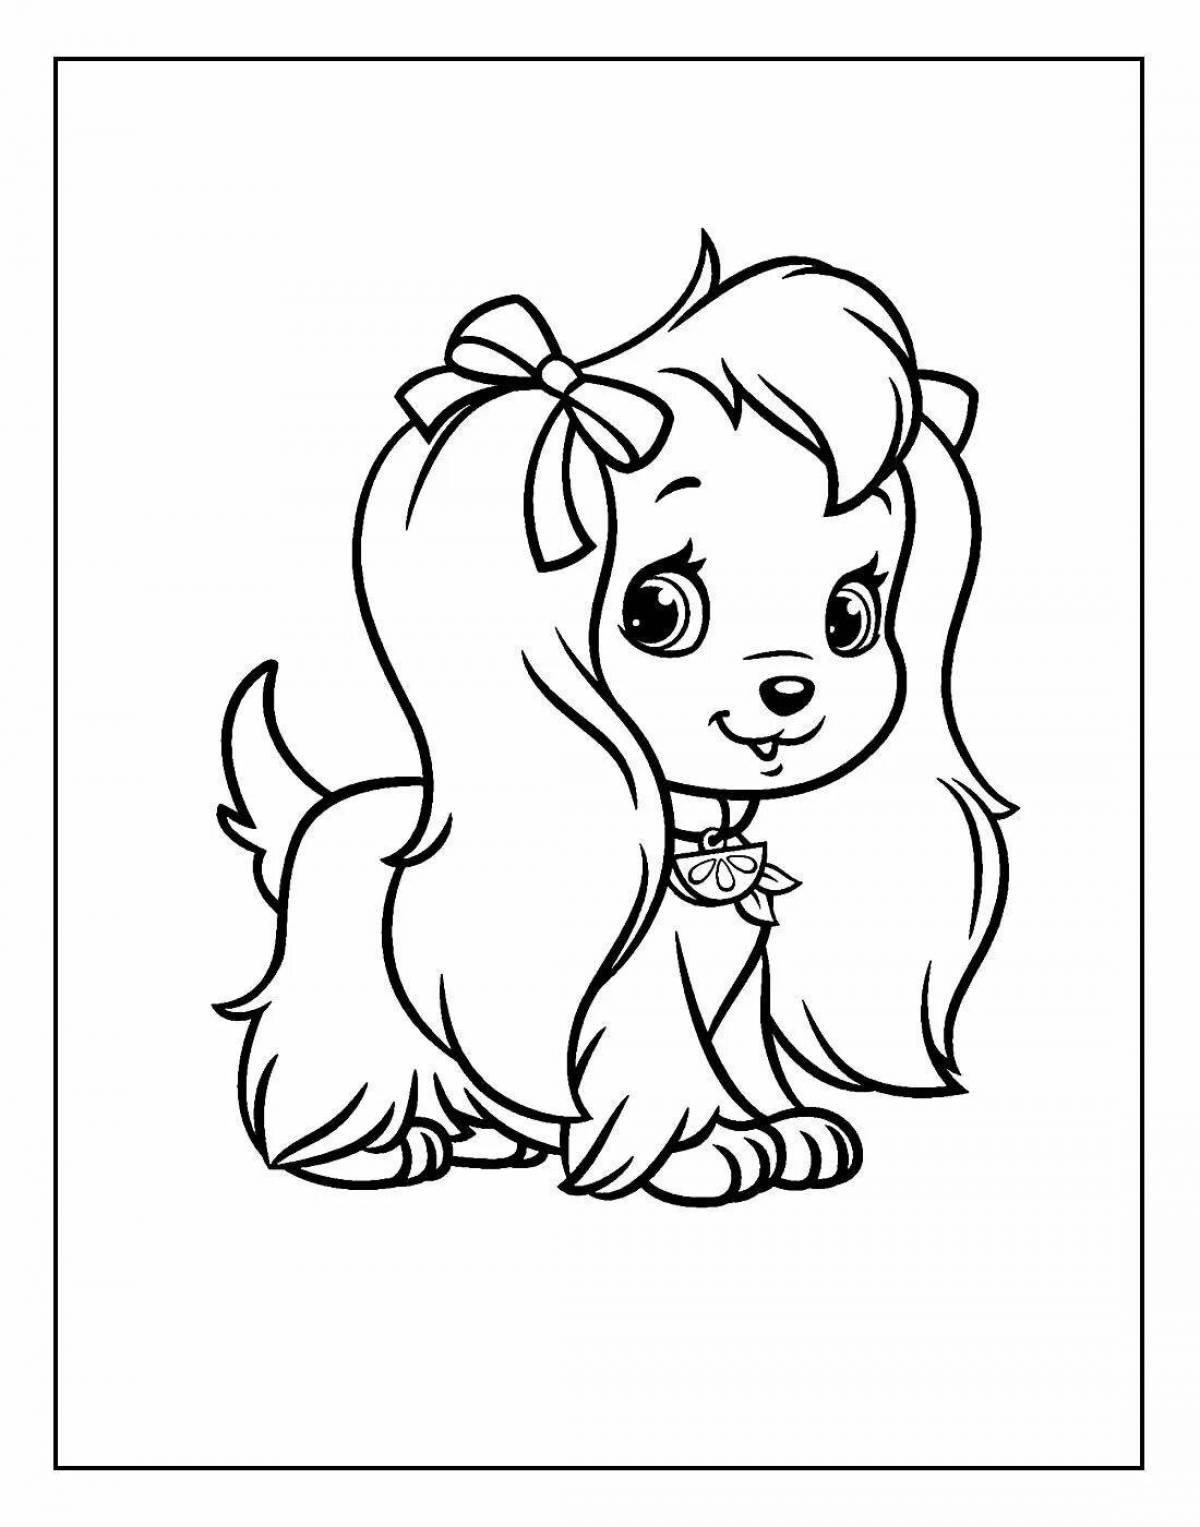 Coloring page excited dog